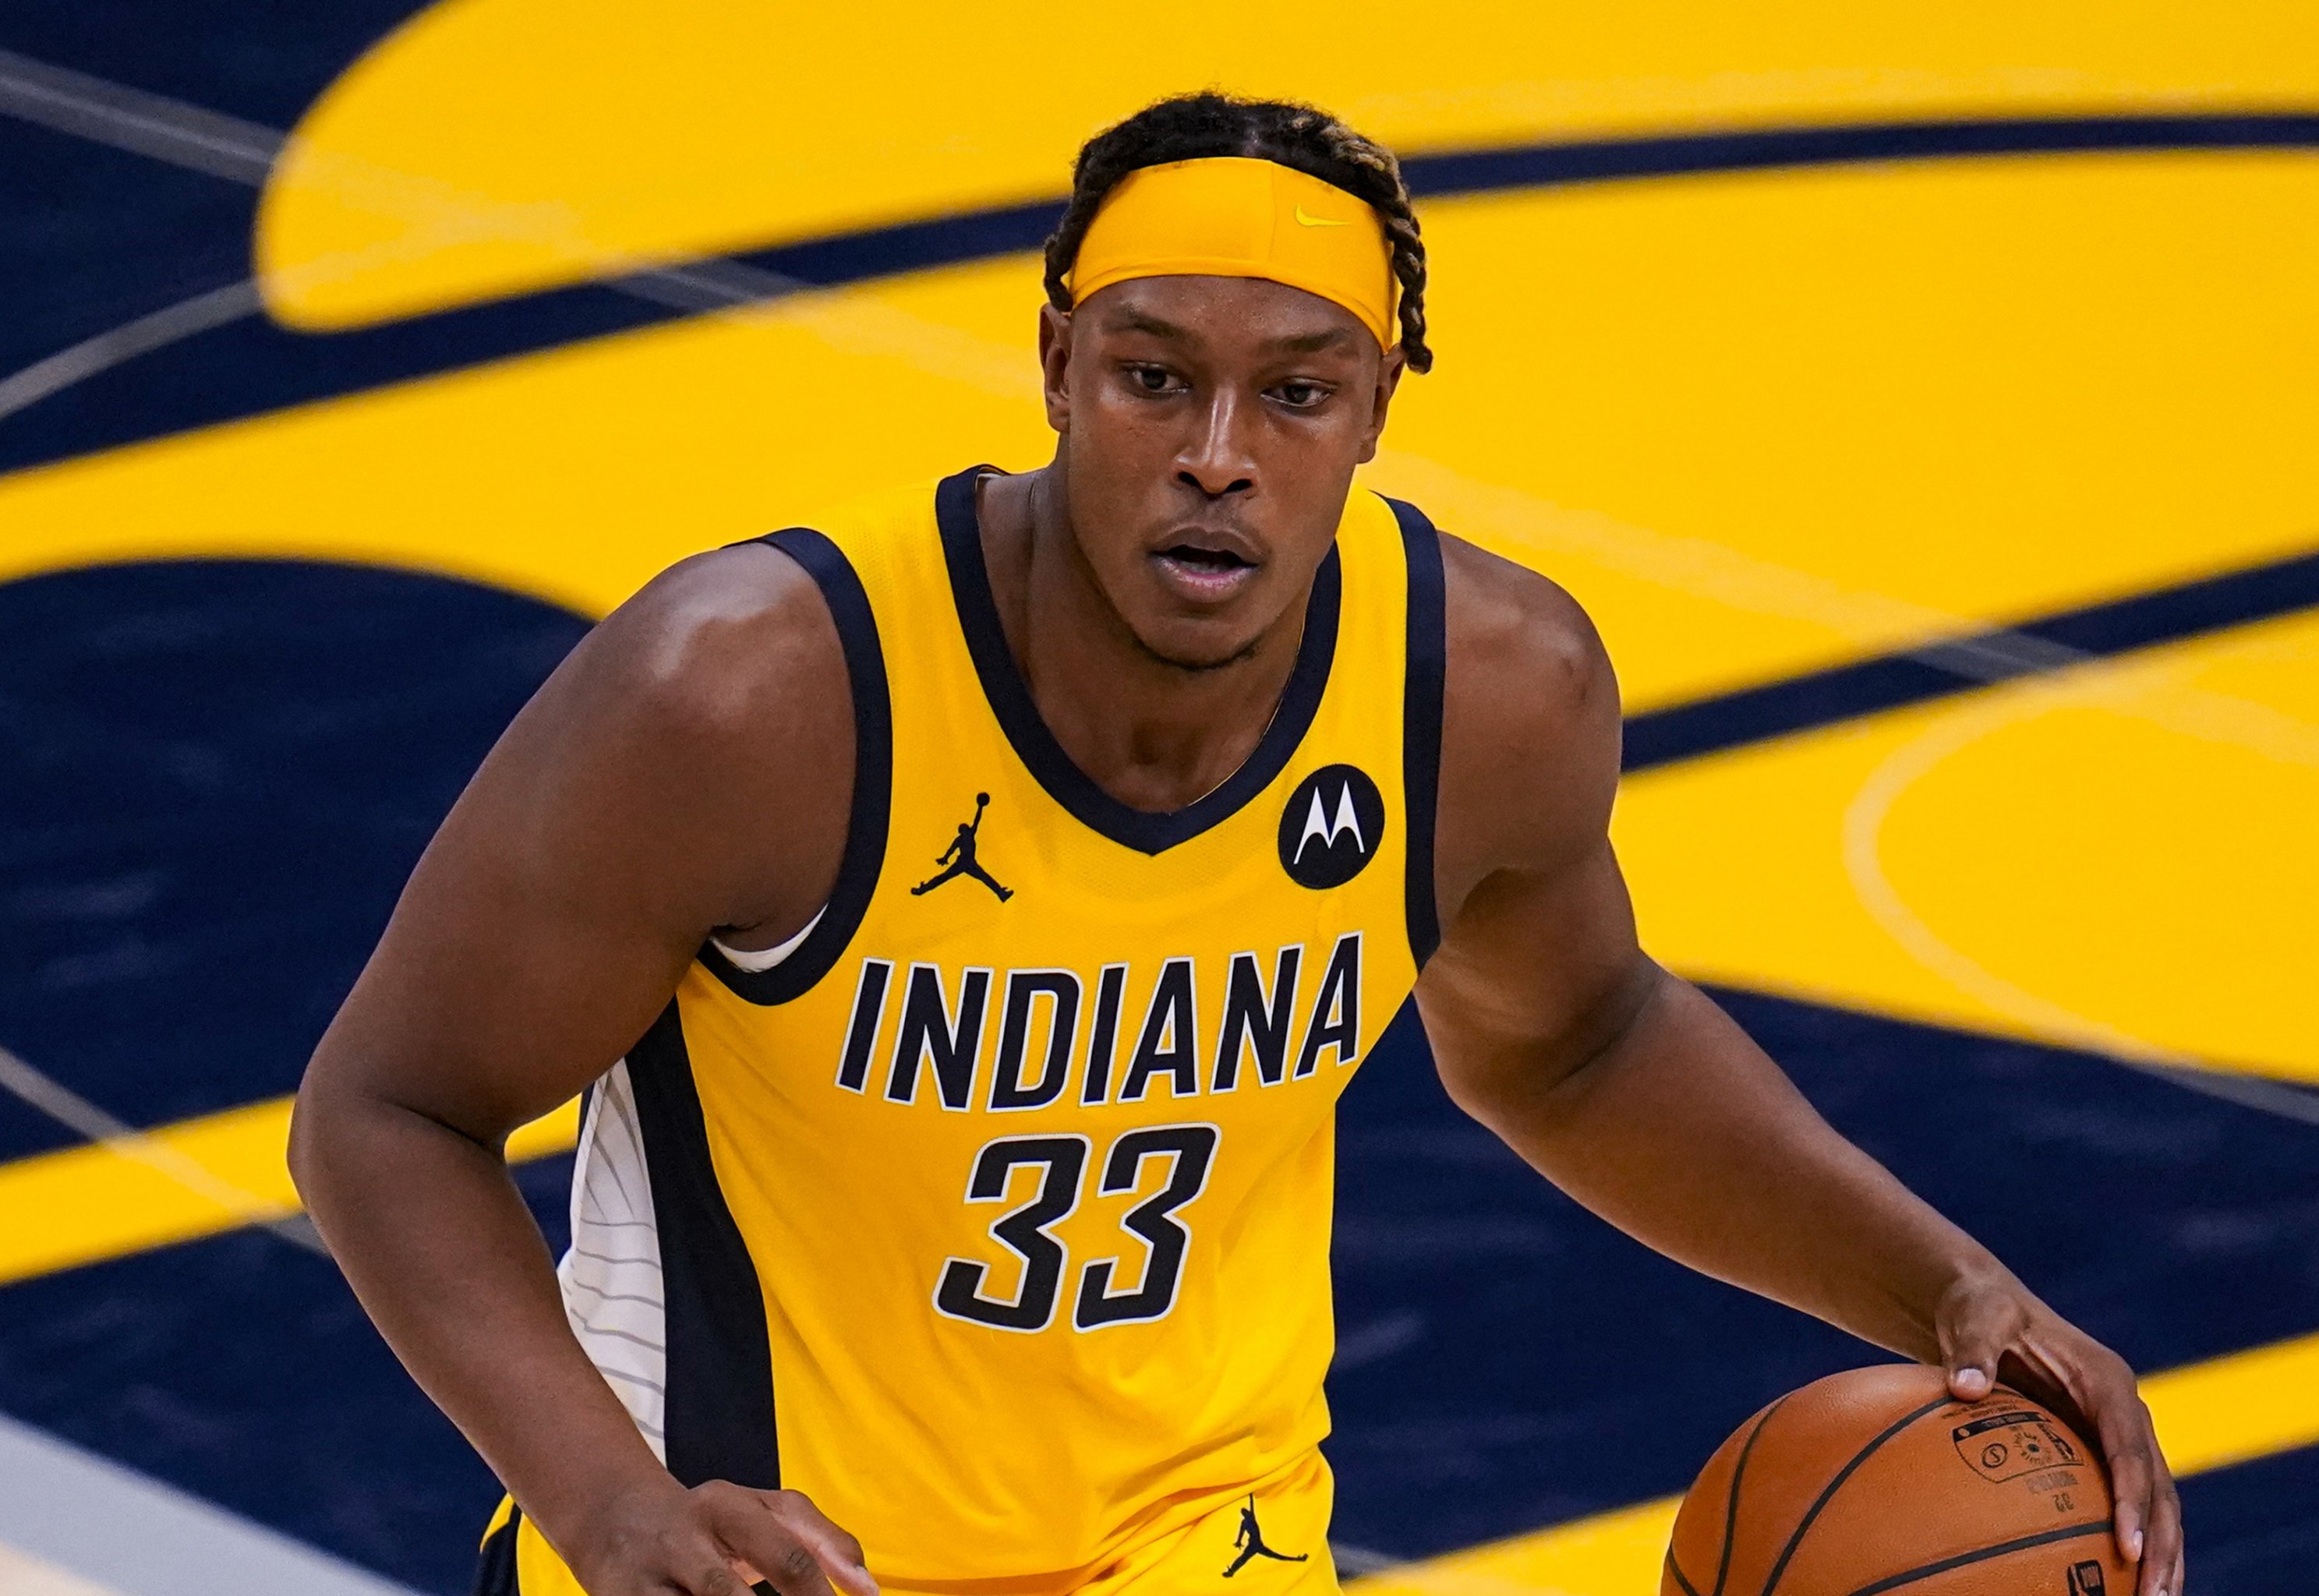 Jersey you wish they'd bring back? : r/pacers